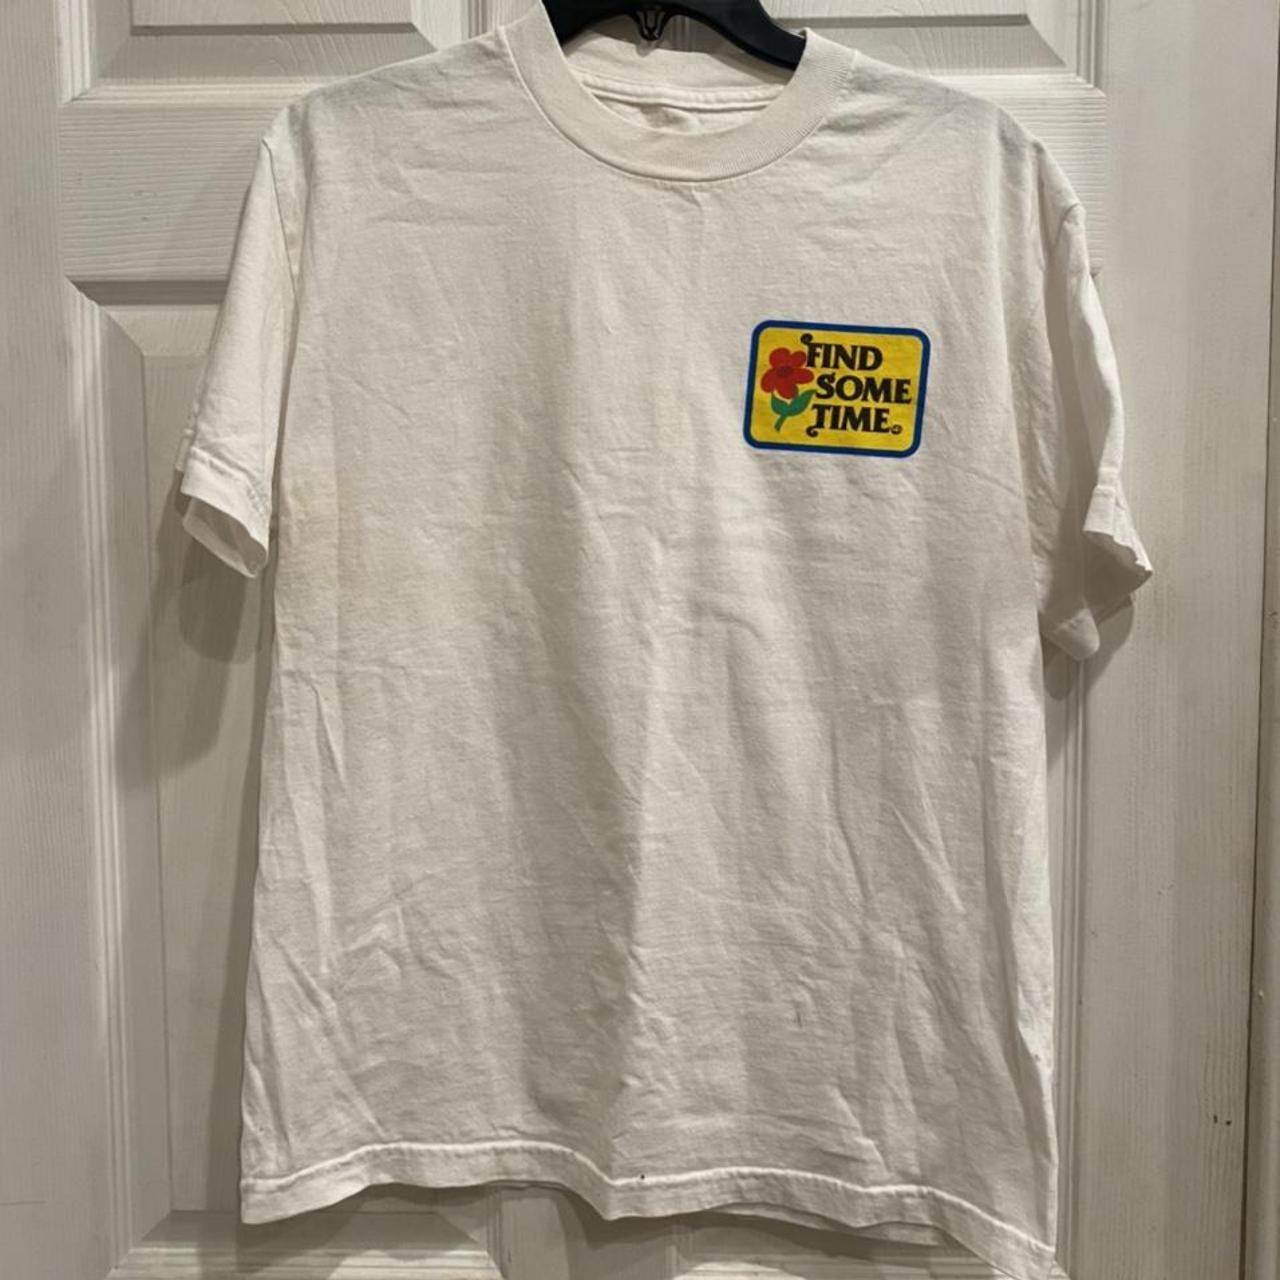 Golf Wang Find Some Time T-shirt in White. Size... - Depop